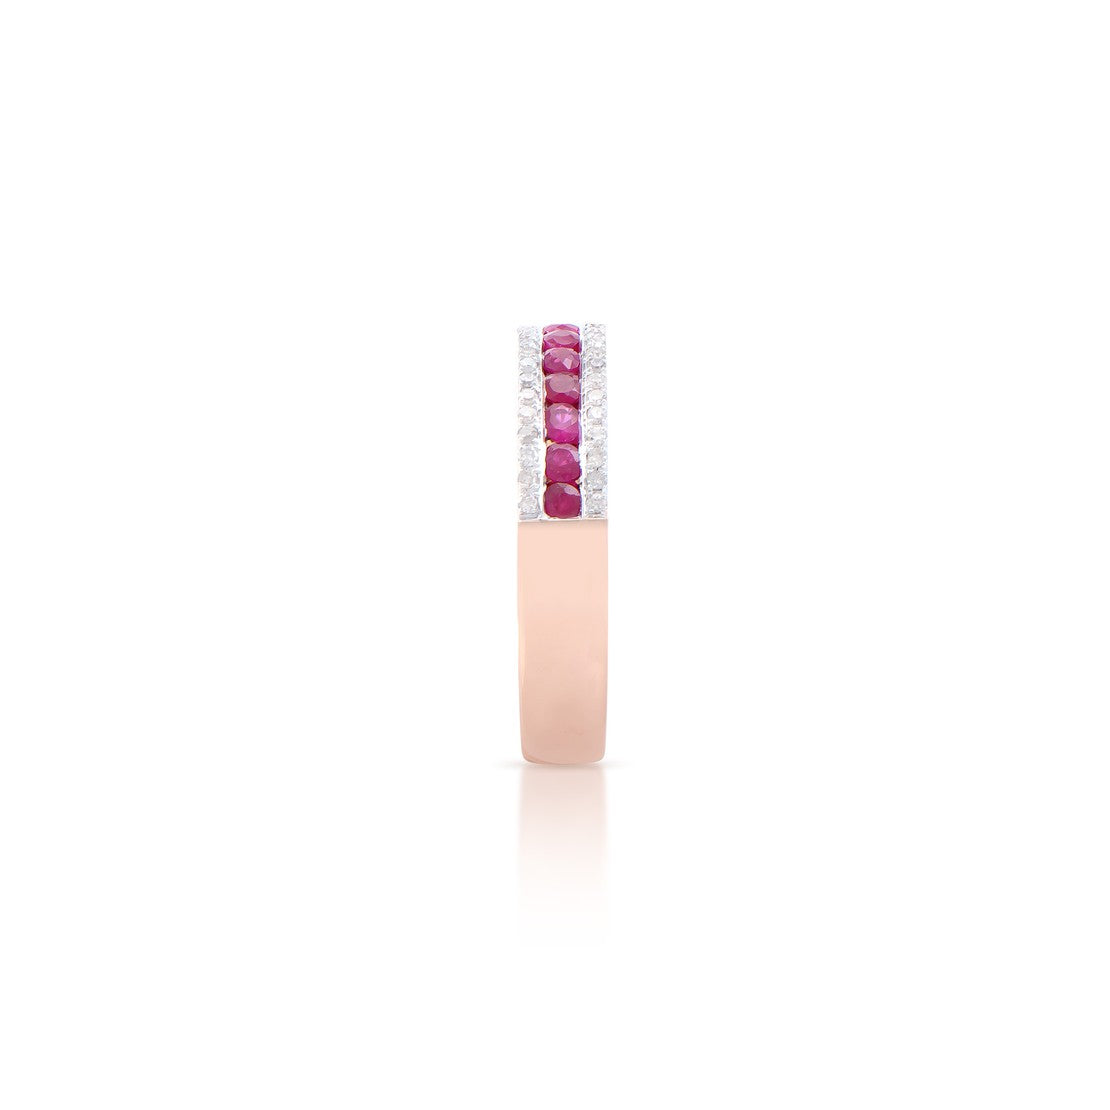 14KT Rose Gold 0.55ctw Ruby and Diamond Ring